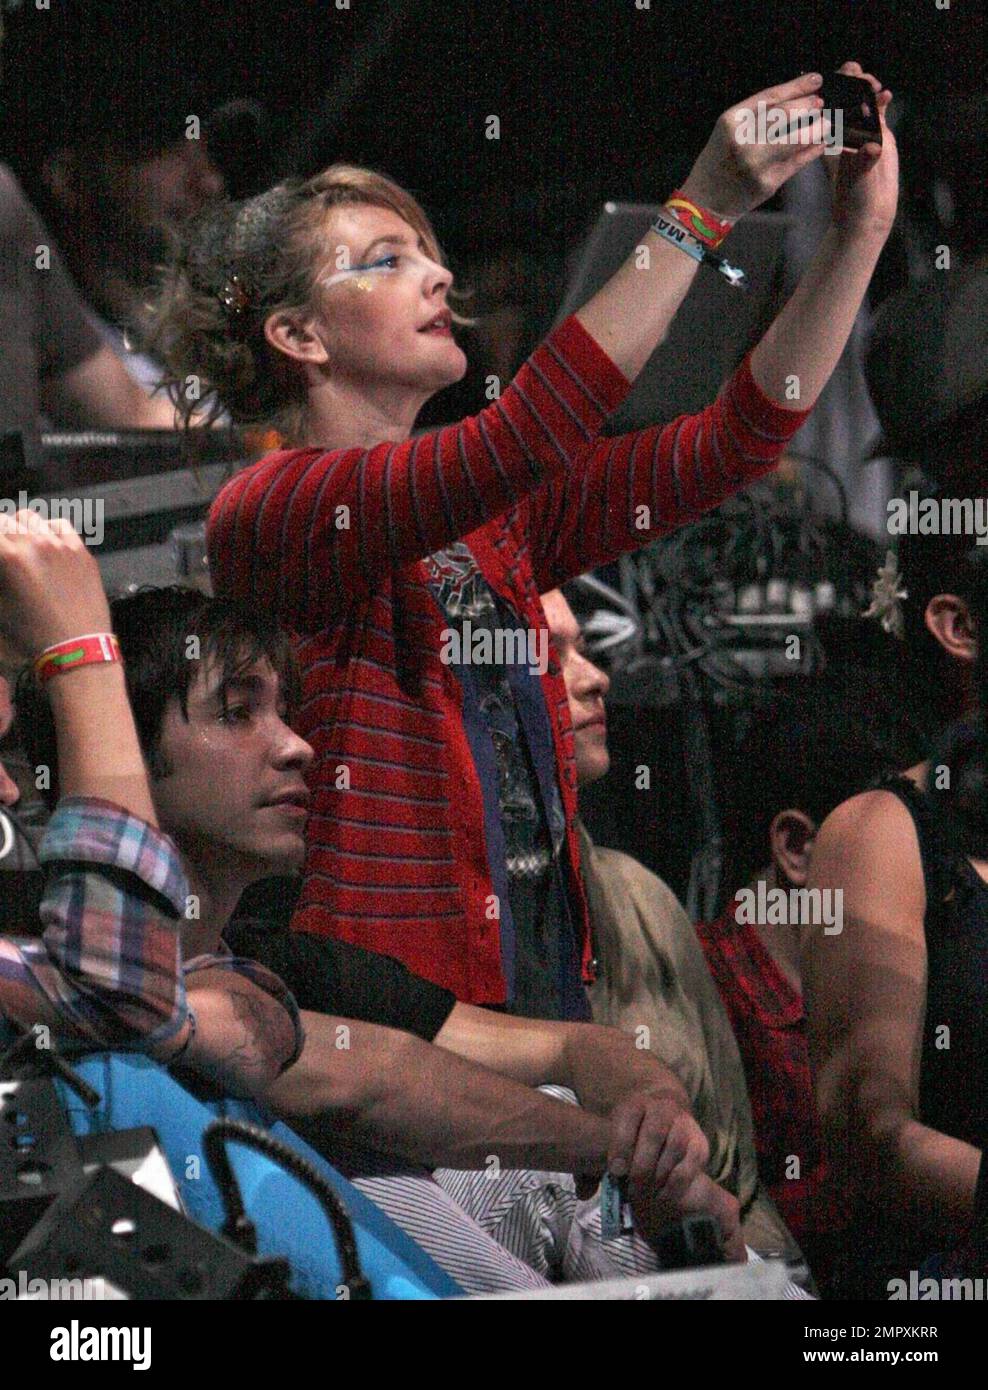 Drew Barrymore and recently reconciled boyfriend Justin Long watch the M.I.A concert.  Long took pictures of Barrymore on his iphone before she appeared up onstage during the concert throwing glow sticks into the audience at Coachella Music and Arts Festival 2009. Indio,CA. 04/18/2009. Stock Photo